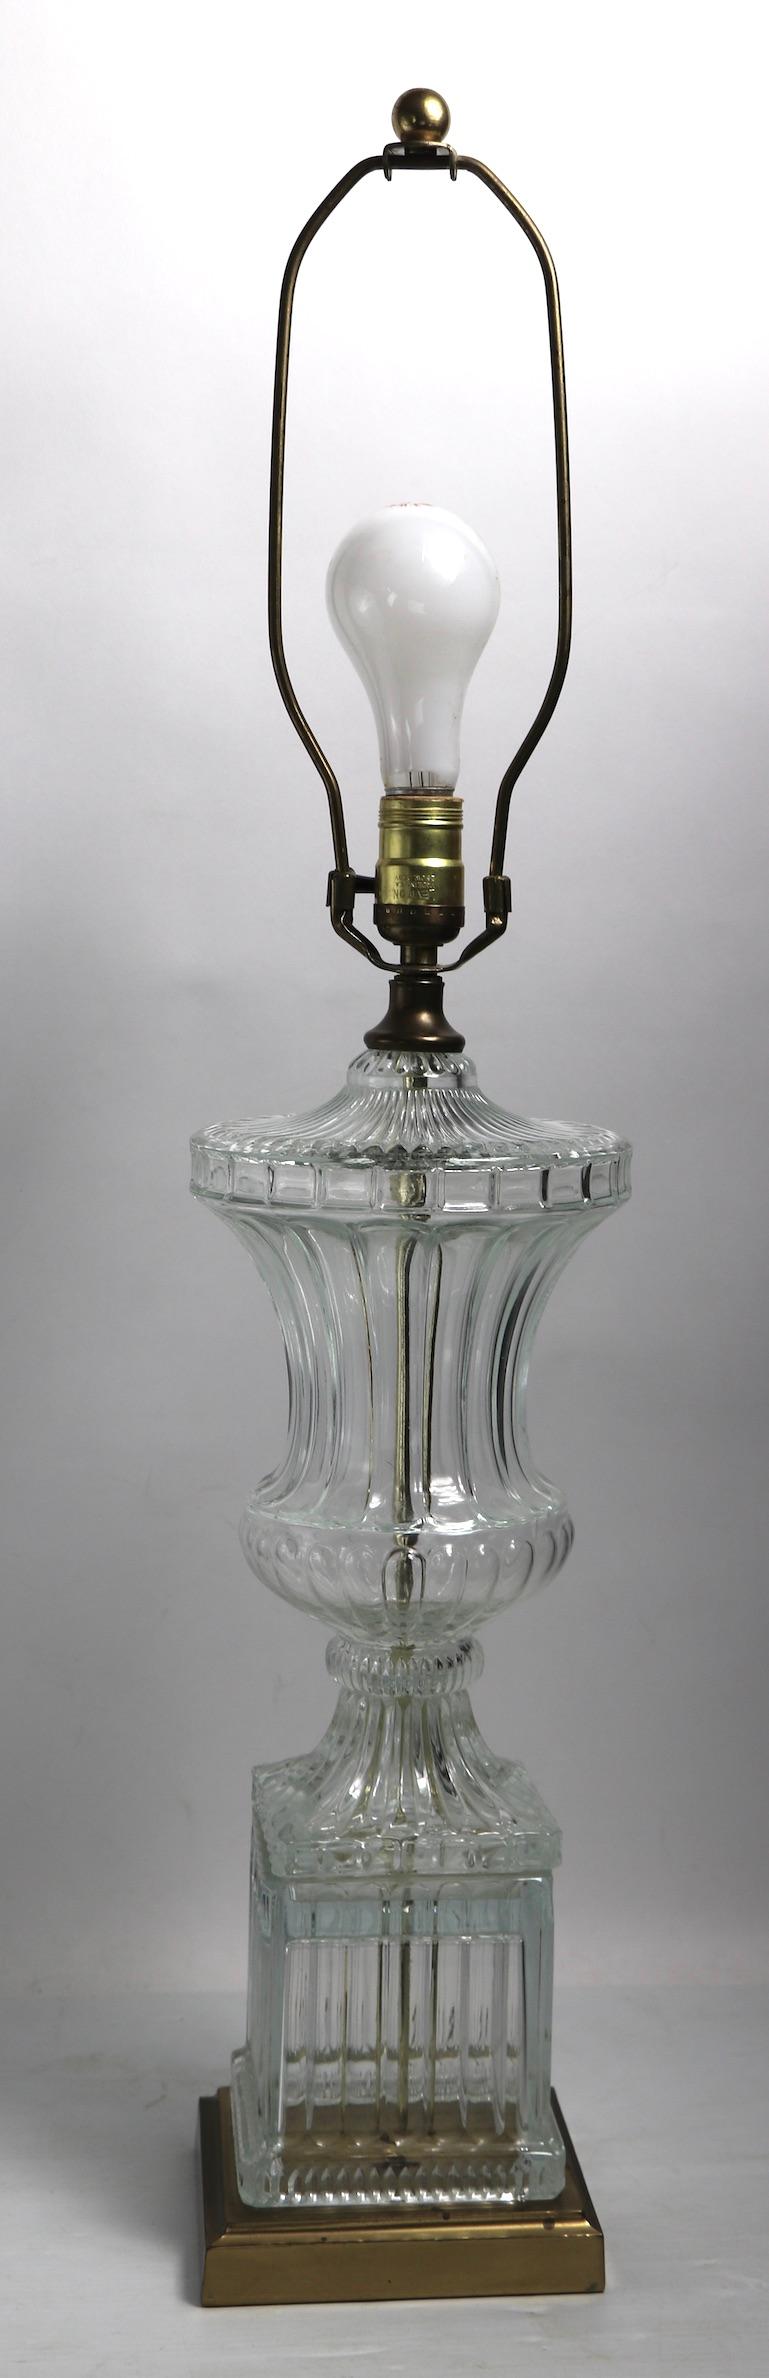 glass urn table lamp